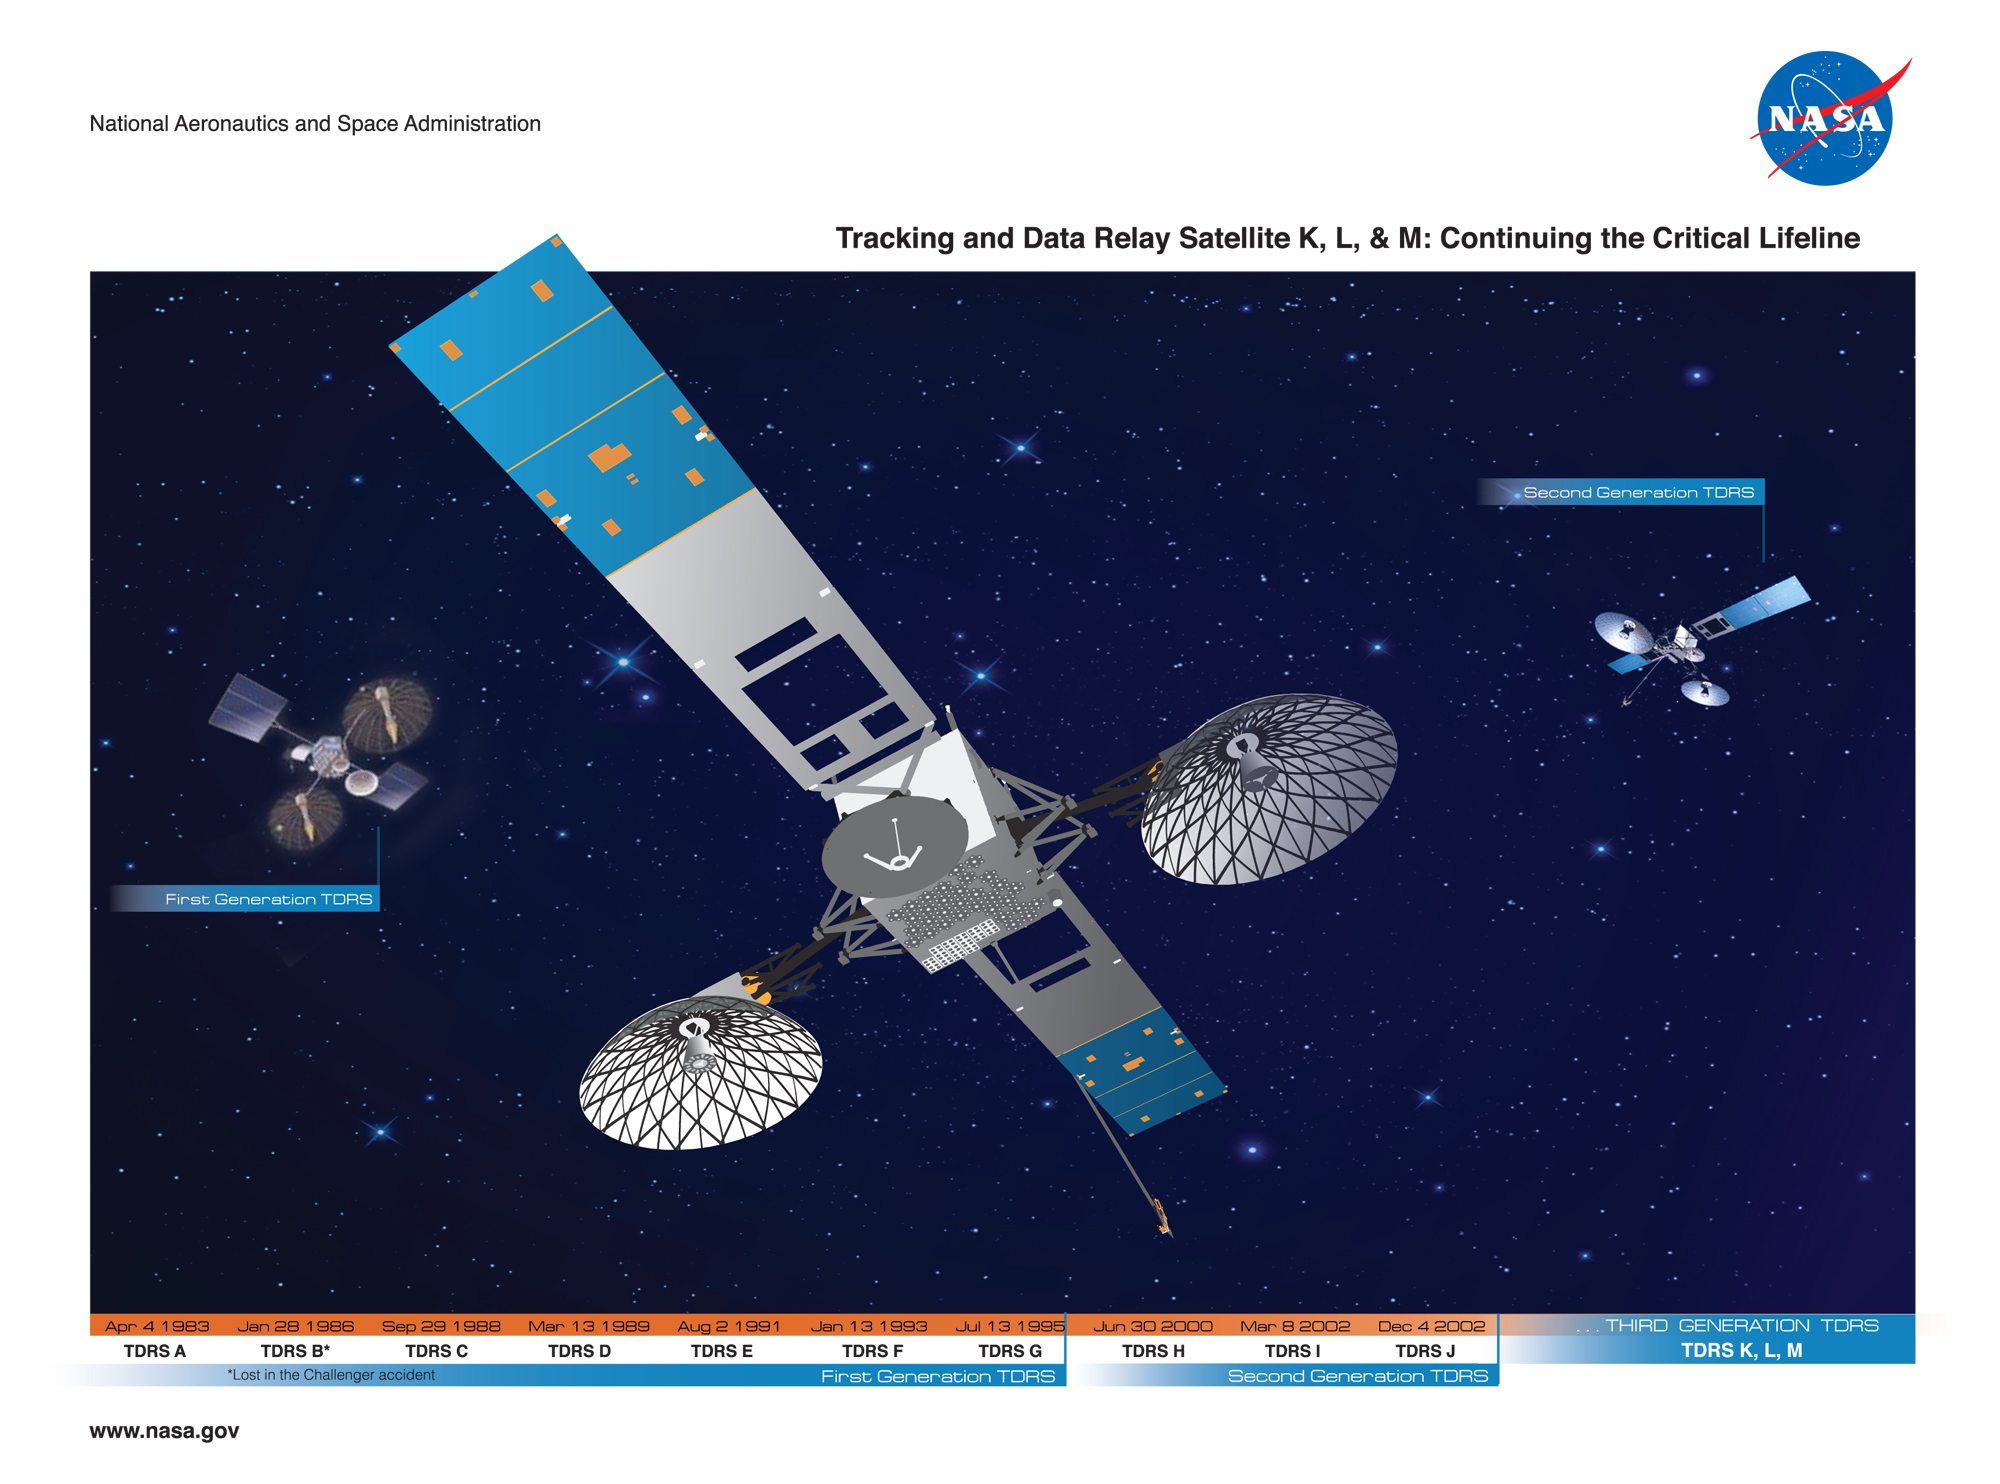 Front: Official NASA satellite project lithograph. 8.5 x 11" designed to share overview of satellite mission, hardware, and launch schedule for general public.